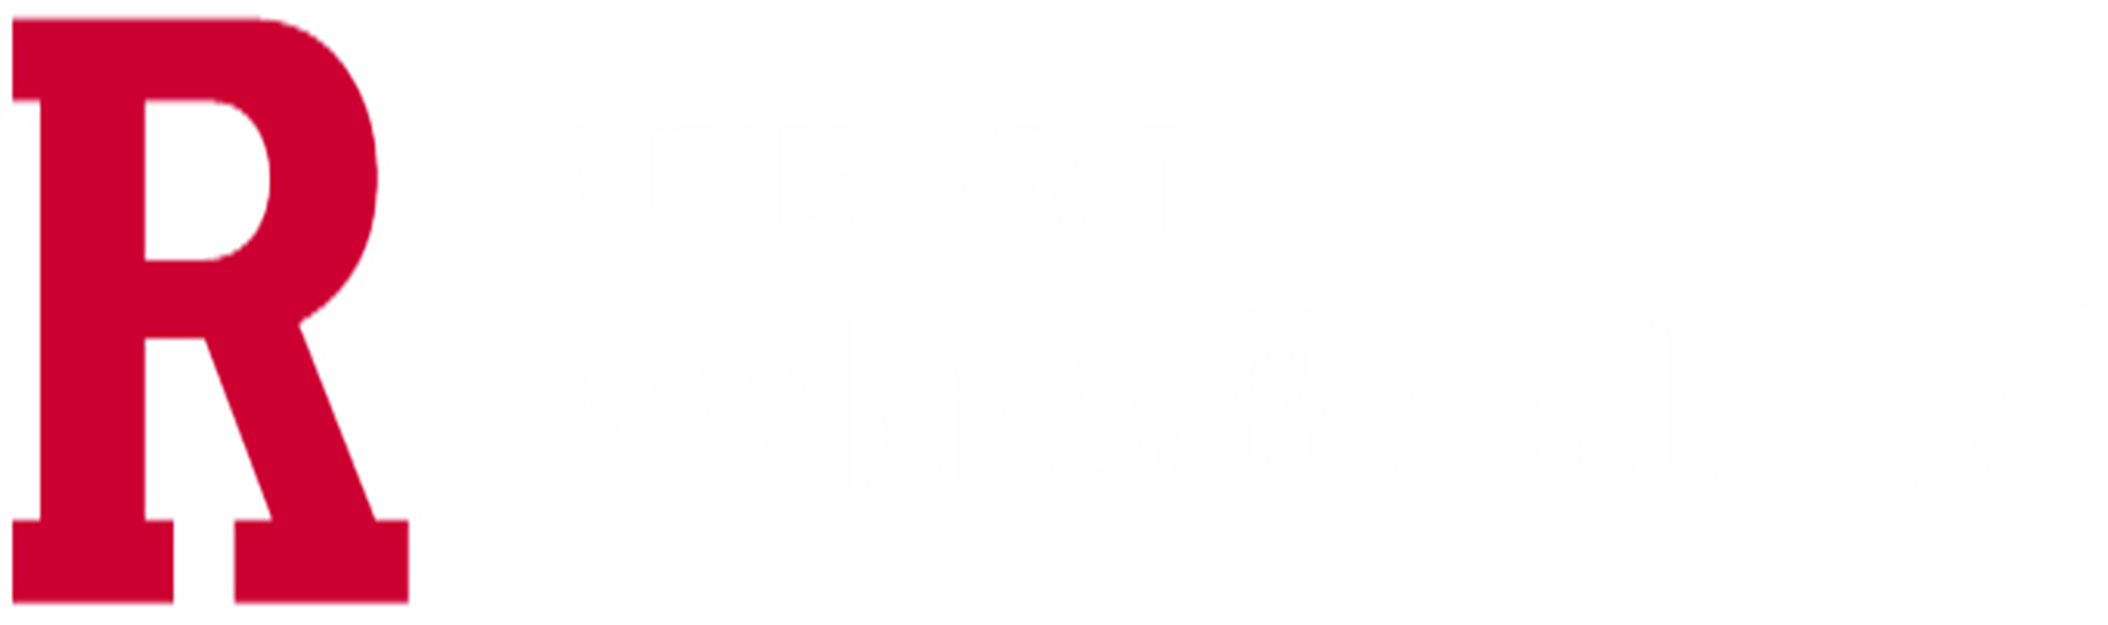 Rutgers Health and New Jersey Medical School's logo in red and black